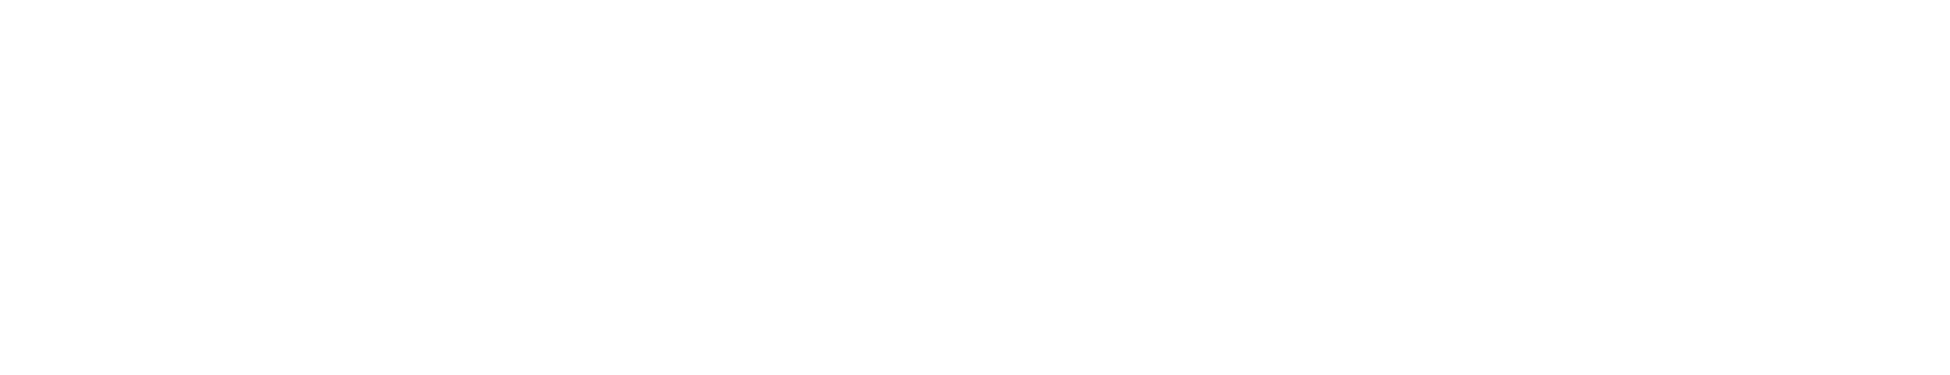 songwriter | mixer | producer